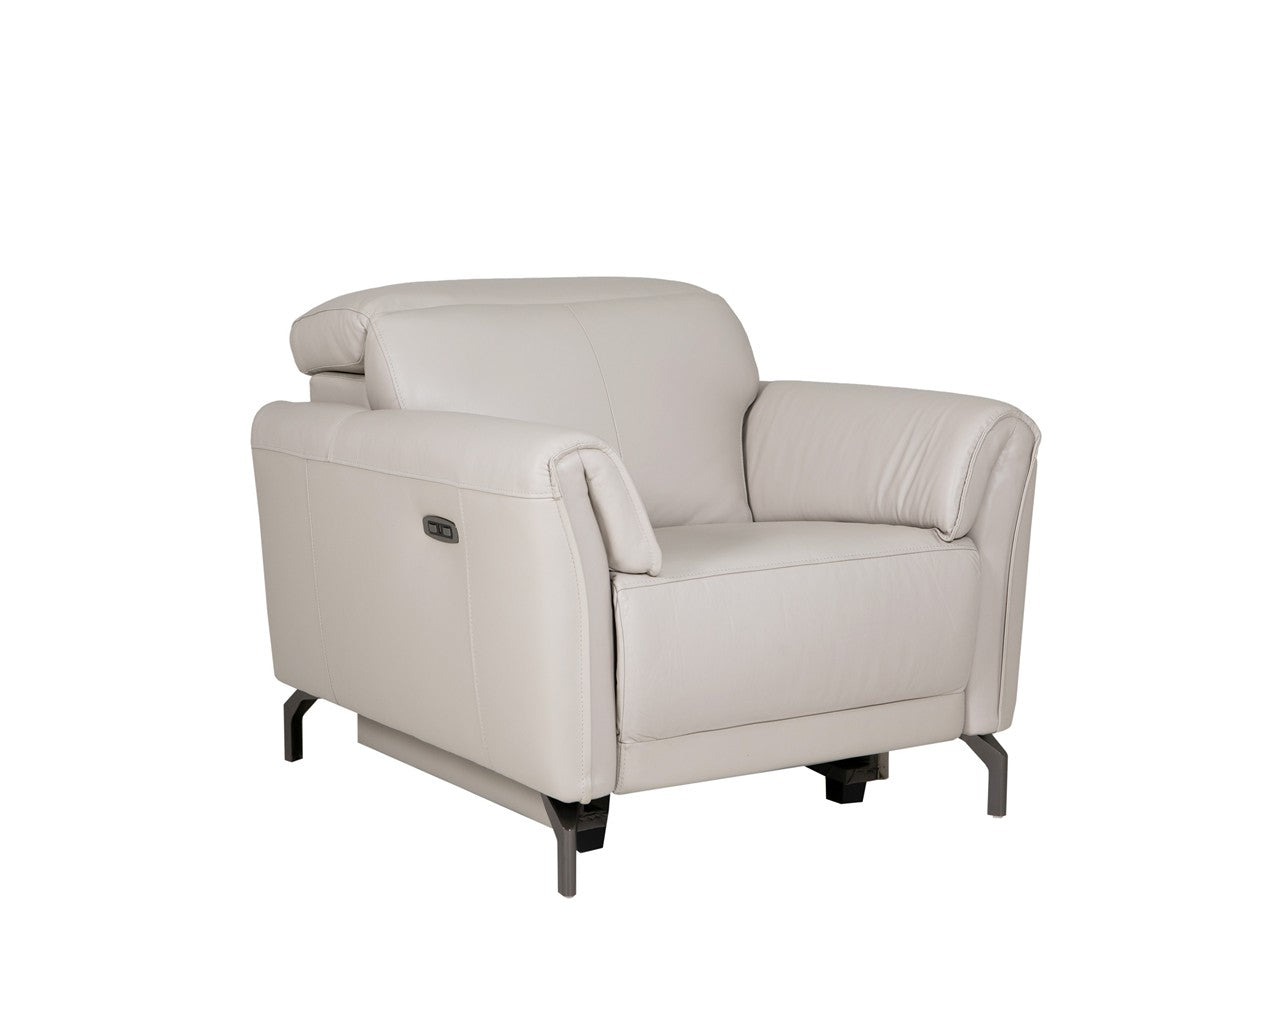 Naples - 1 Seater Electric Recliner